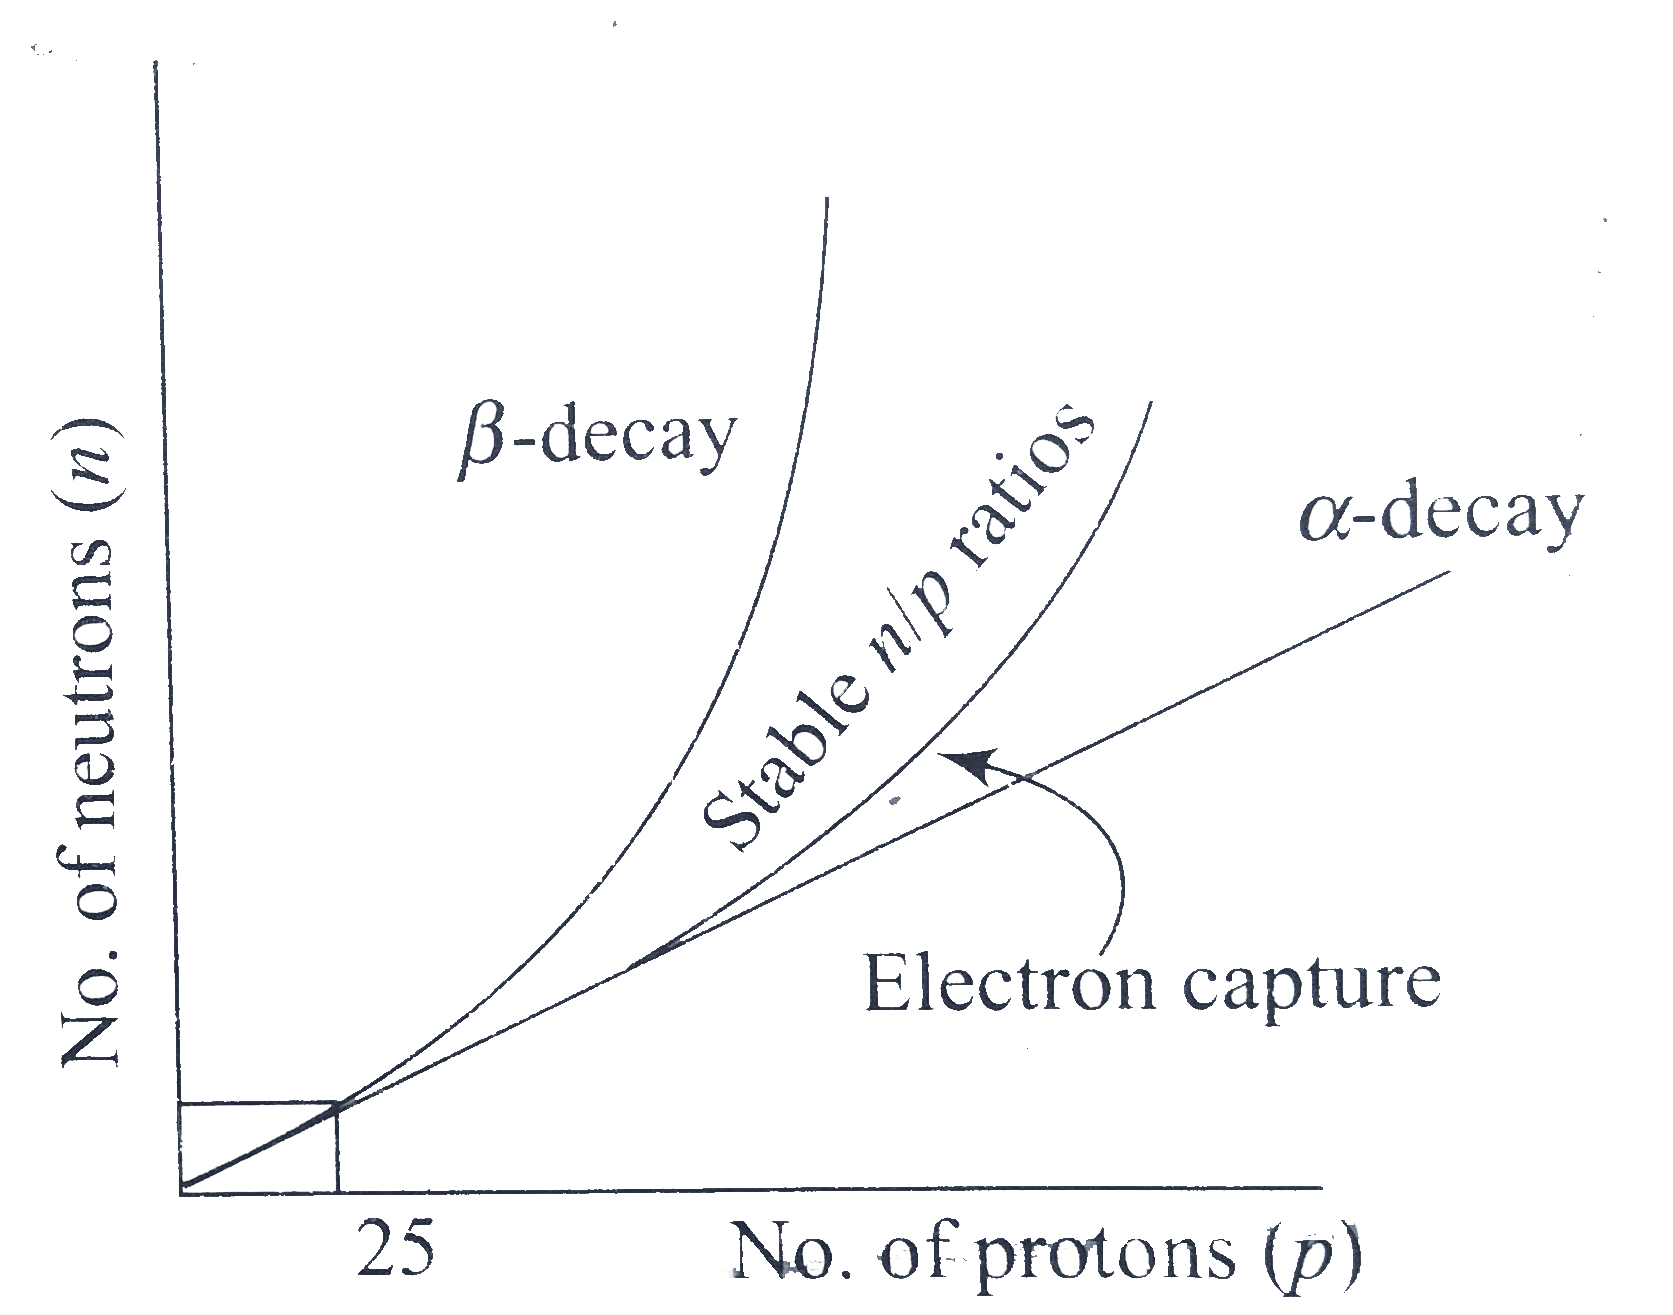 Various rules of thumb have seen proposed by the scientific community to expalin the mode of radioactive decay by various radioisotopes. One of the major rules is called the n//p ratio. If all the known isotopes of the elemnts are plotted on a graph of number of neutrons (n) versus number of protons (p), it is observed that all isotopes lying outside of a ''stable'' n//p ratio region are radioactive as shown fig. The graph exhibits straight line behaviour with unit slope up to p=25. Above p=25, tgose isotopes with n//p ratios lying above the stable region usually undergo beta decay. Very heavy isotopes (pgt83) are unstable because of their relativley large nuclei and they undergo alpha decay. Gamma ray emission does not involve the release of a particle. It represnts a change in an atom from a higher energy level to a lower energy level.       How would the radioisotope of magnesium with atomic mass 27 undergo radioactive decay?.